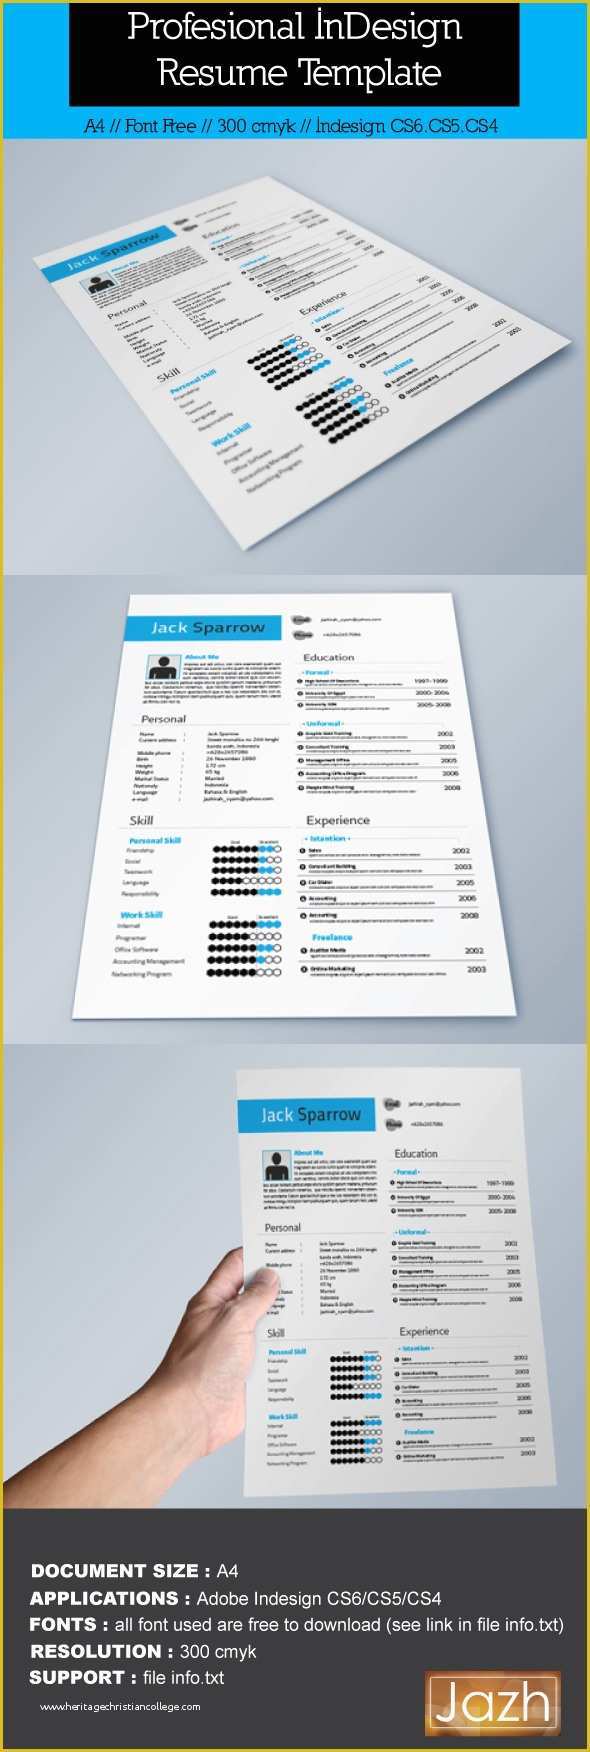 Resume Indesign Template Free Download Of Indesign Resume Template On Behance